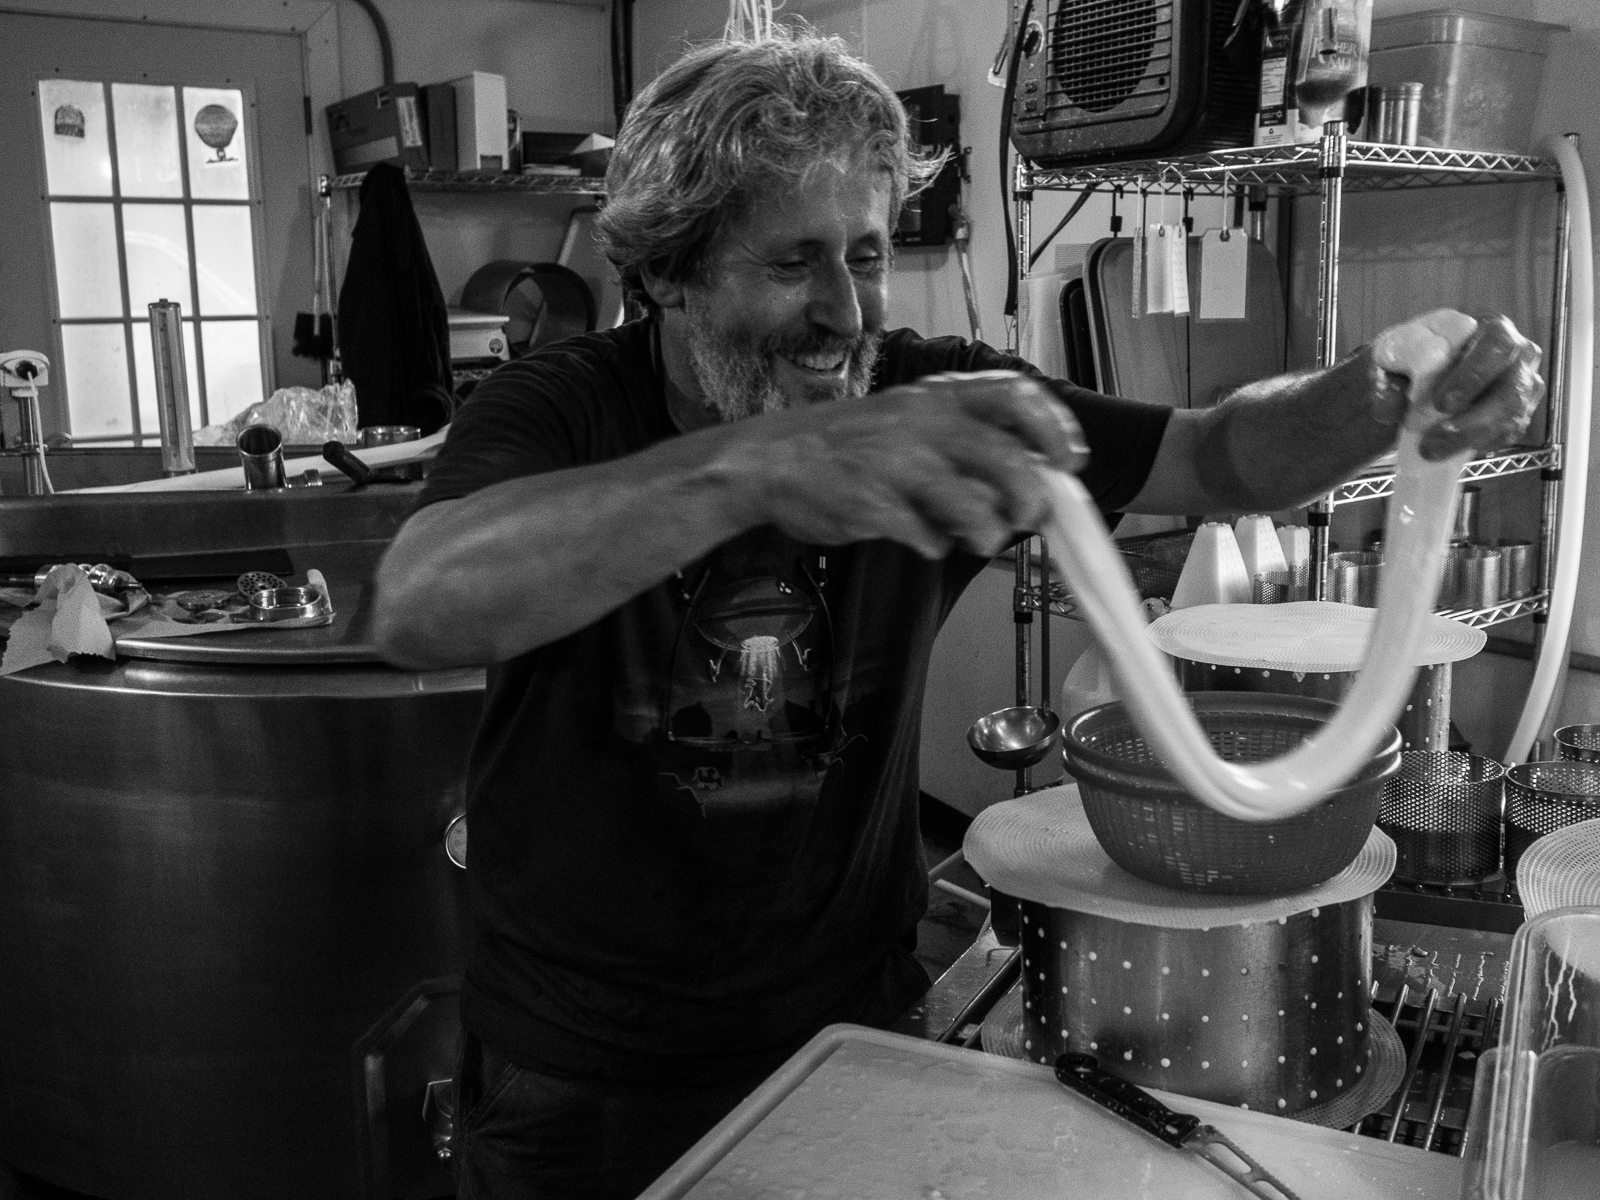 Jonathan White stretches curds for cheese